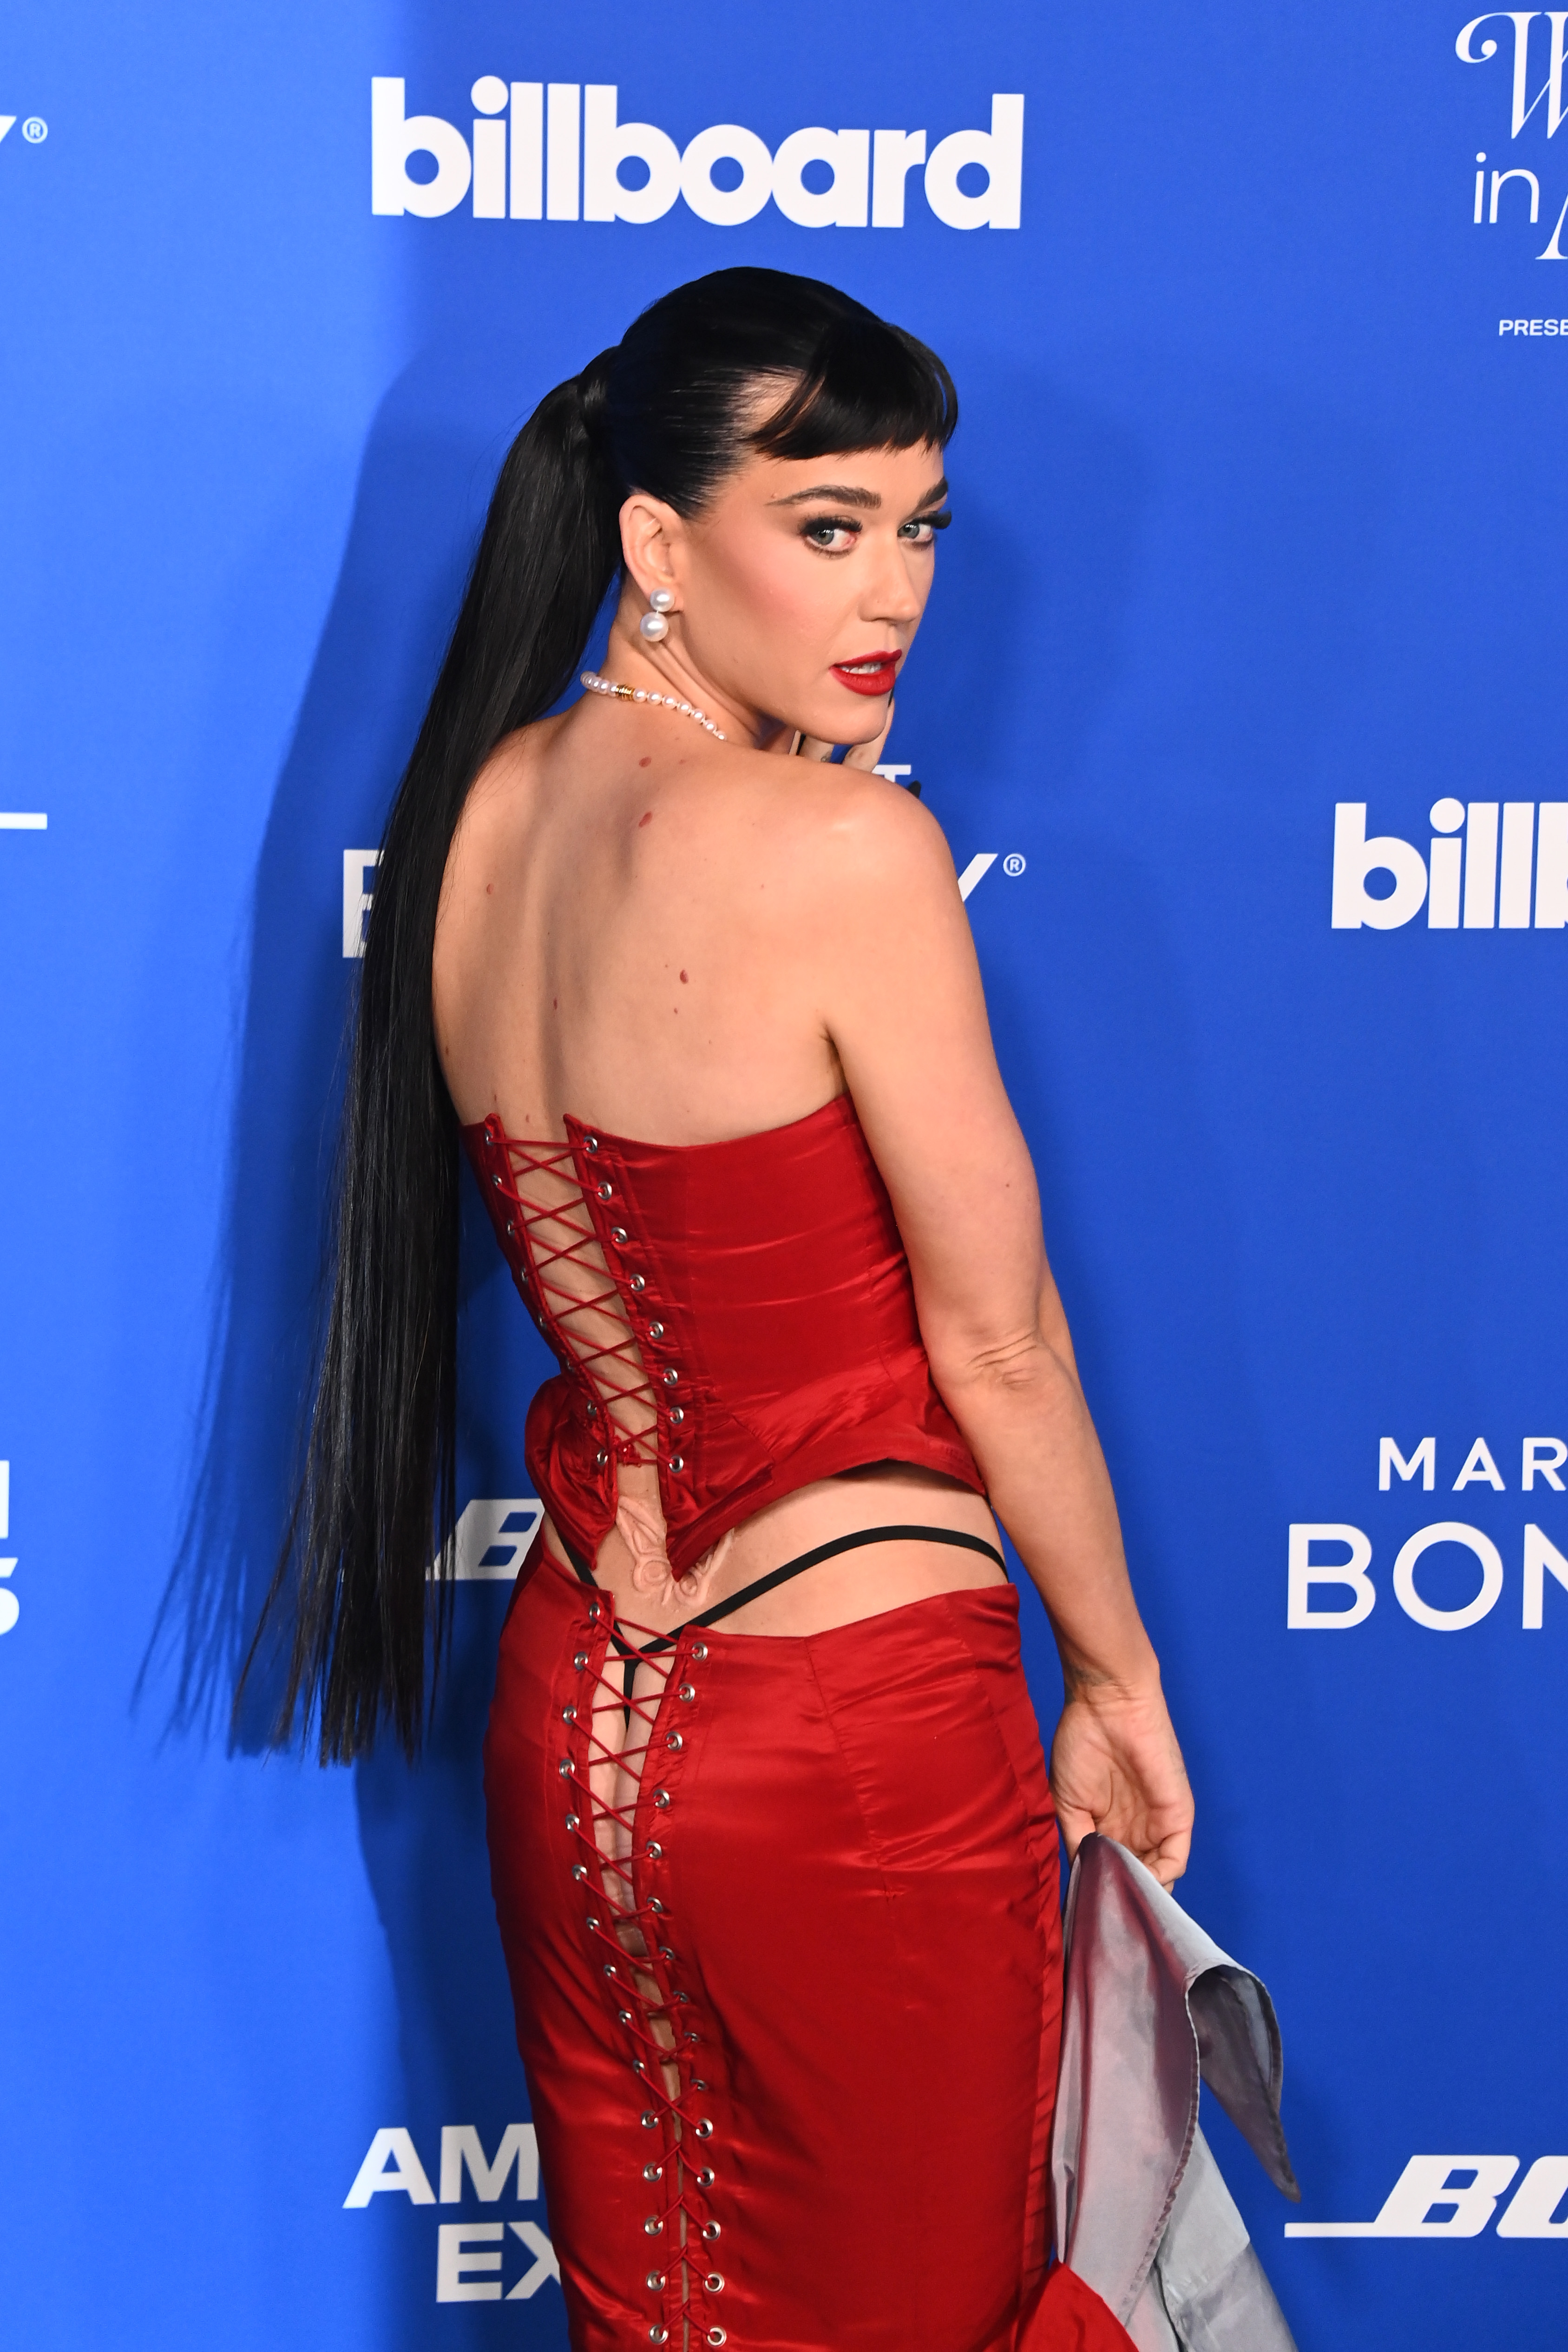 Katy raised pregnancy speculation after fans noticed her stomach in the NSFW two-piece she wore to Billboard's Women in Music event on Wednesday